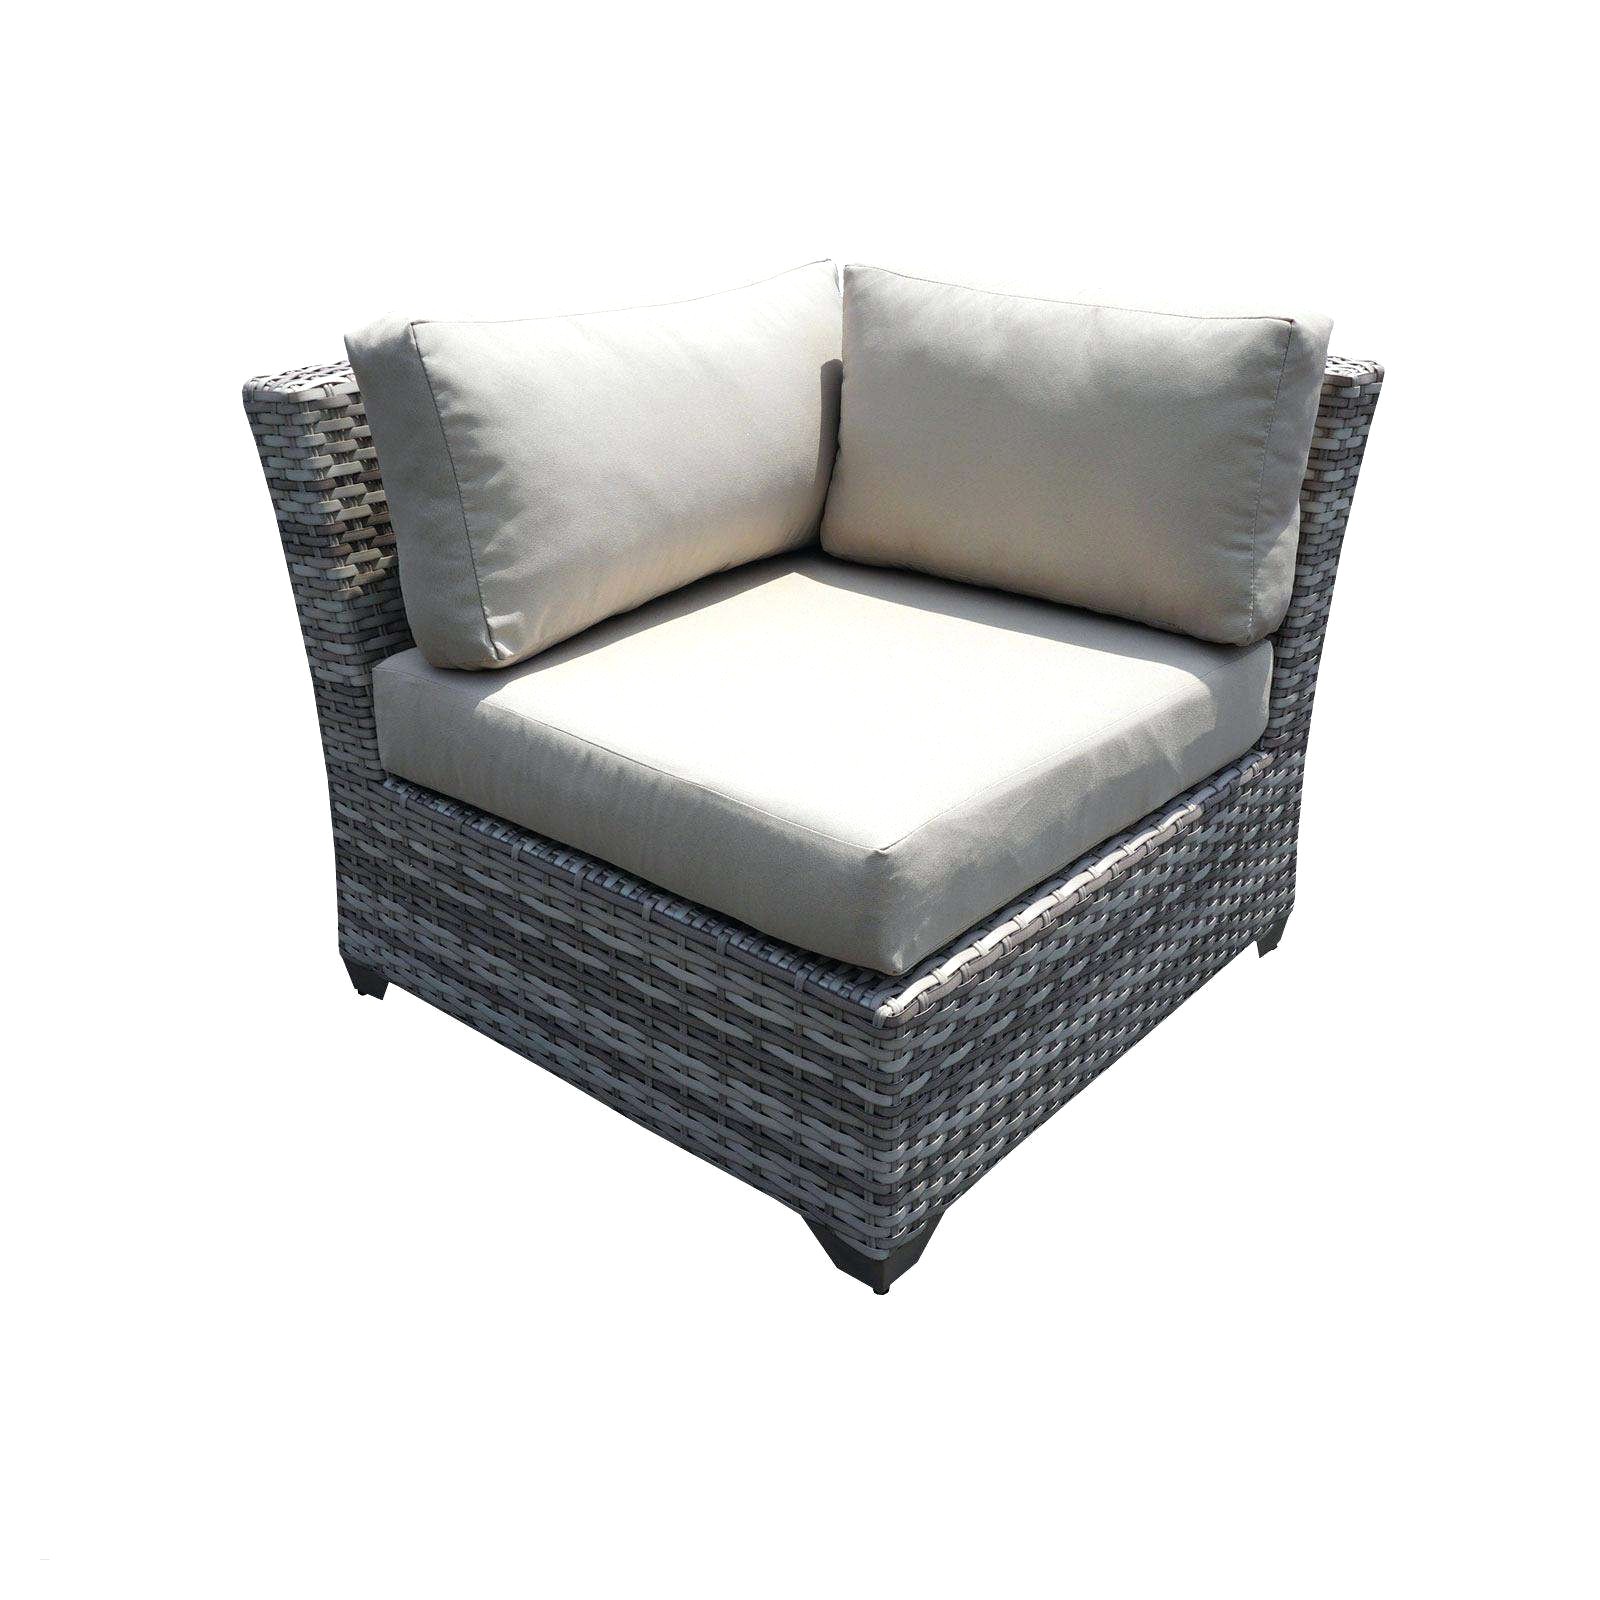 patio furniture cushion covers inspirational wicker outdoor sofa 0d patio chairs sale replacement cushions